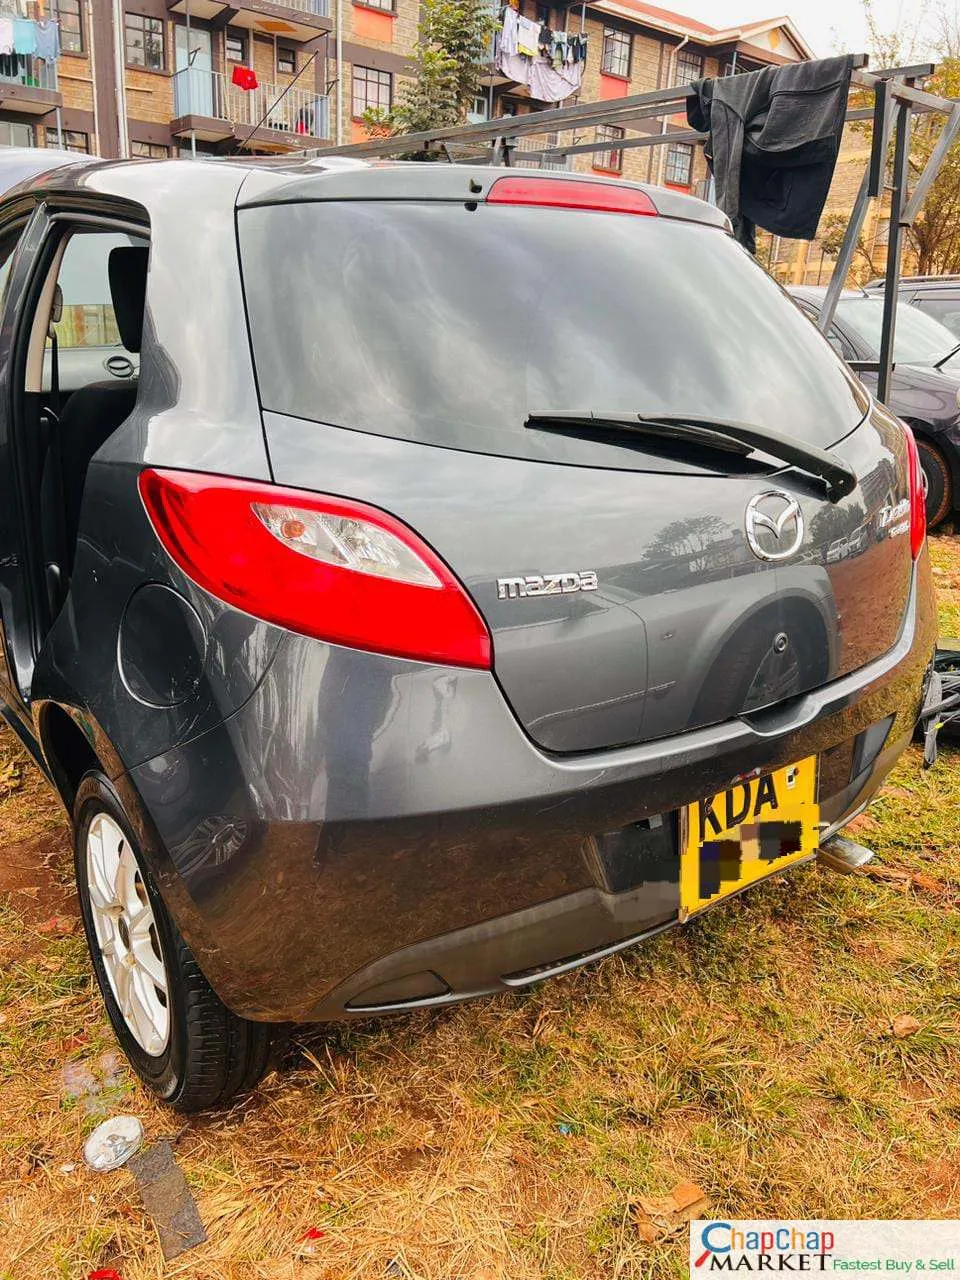 Mazda Demio For sale in Kenya KD 580K ONLY You Pay 30% DEPOSIT TRADE IN OK EXCLUSIVE